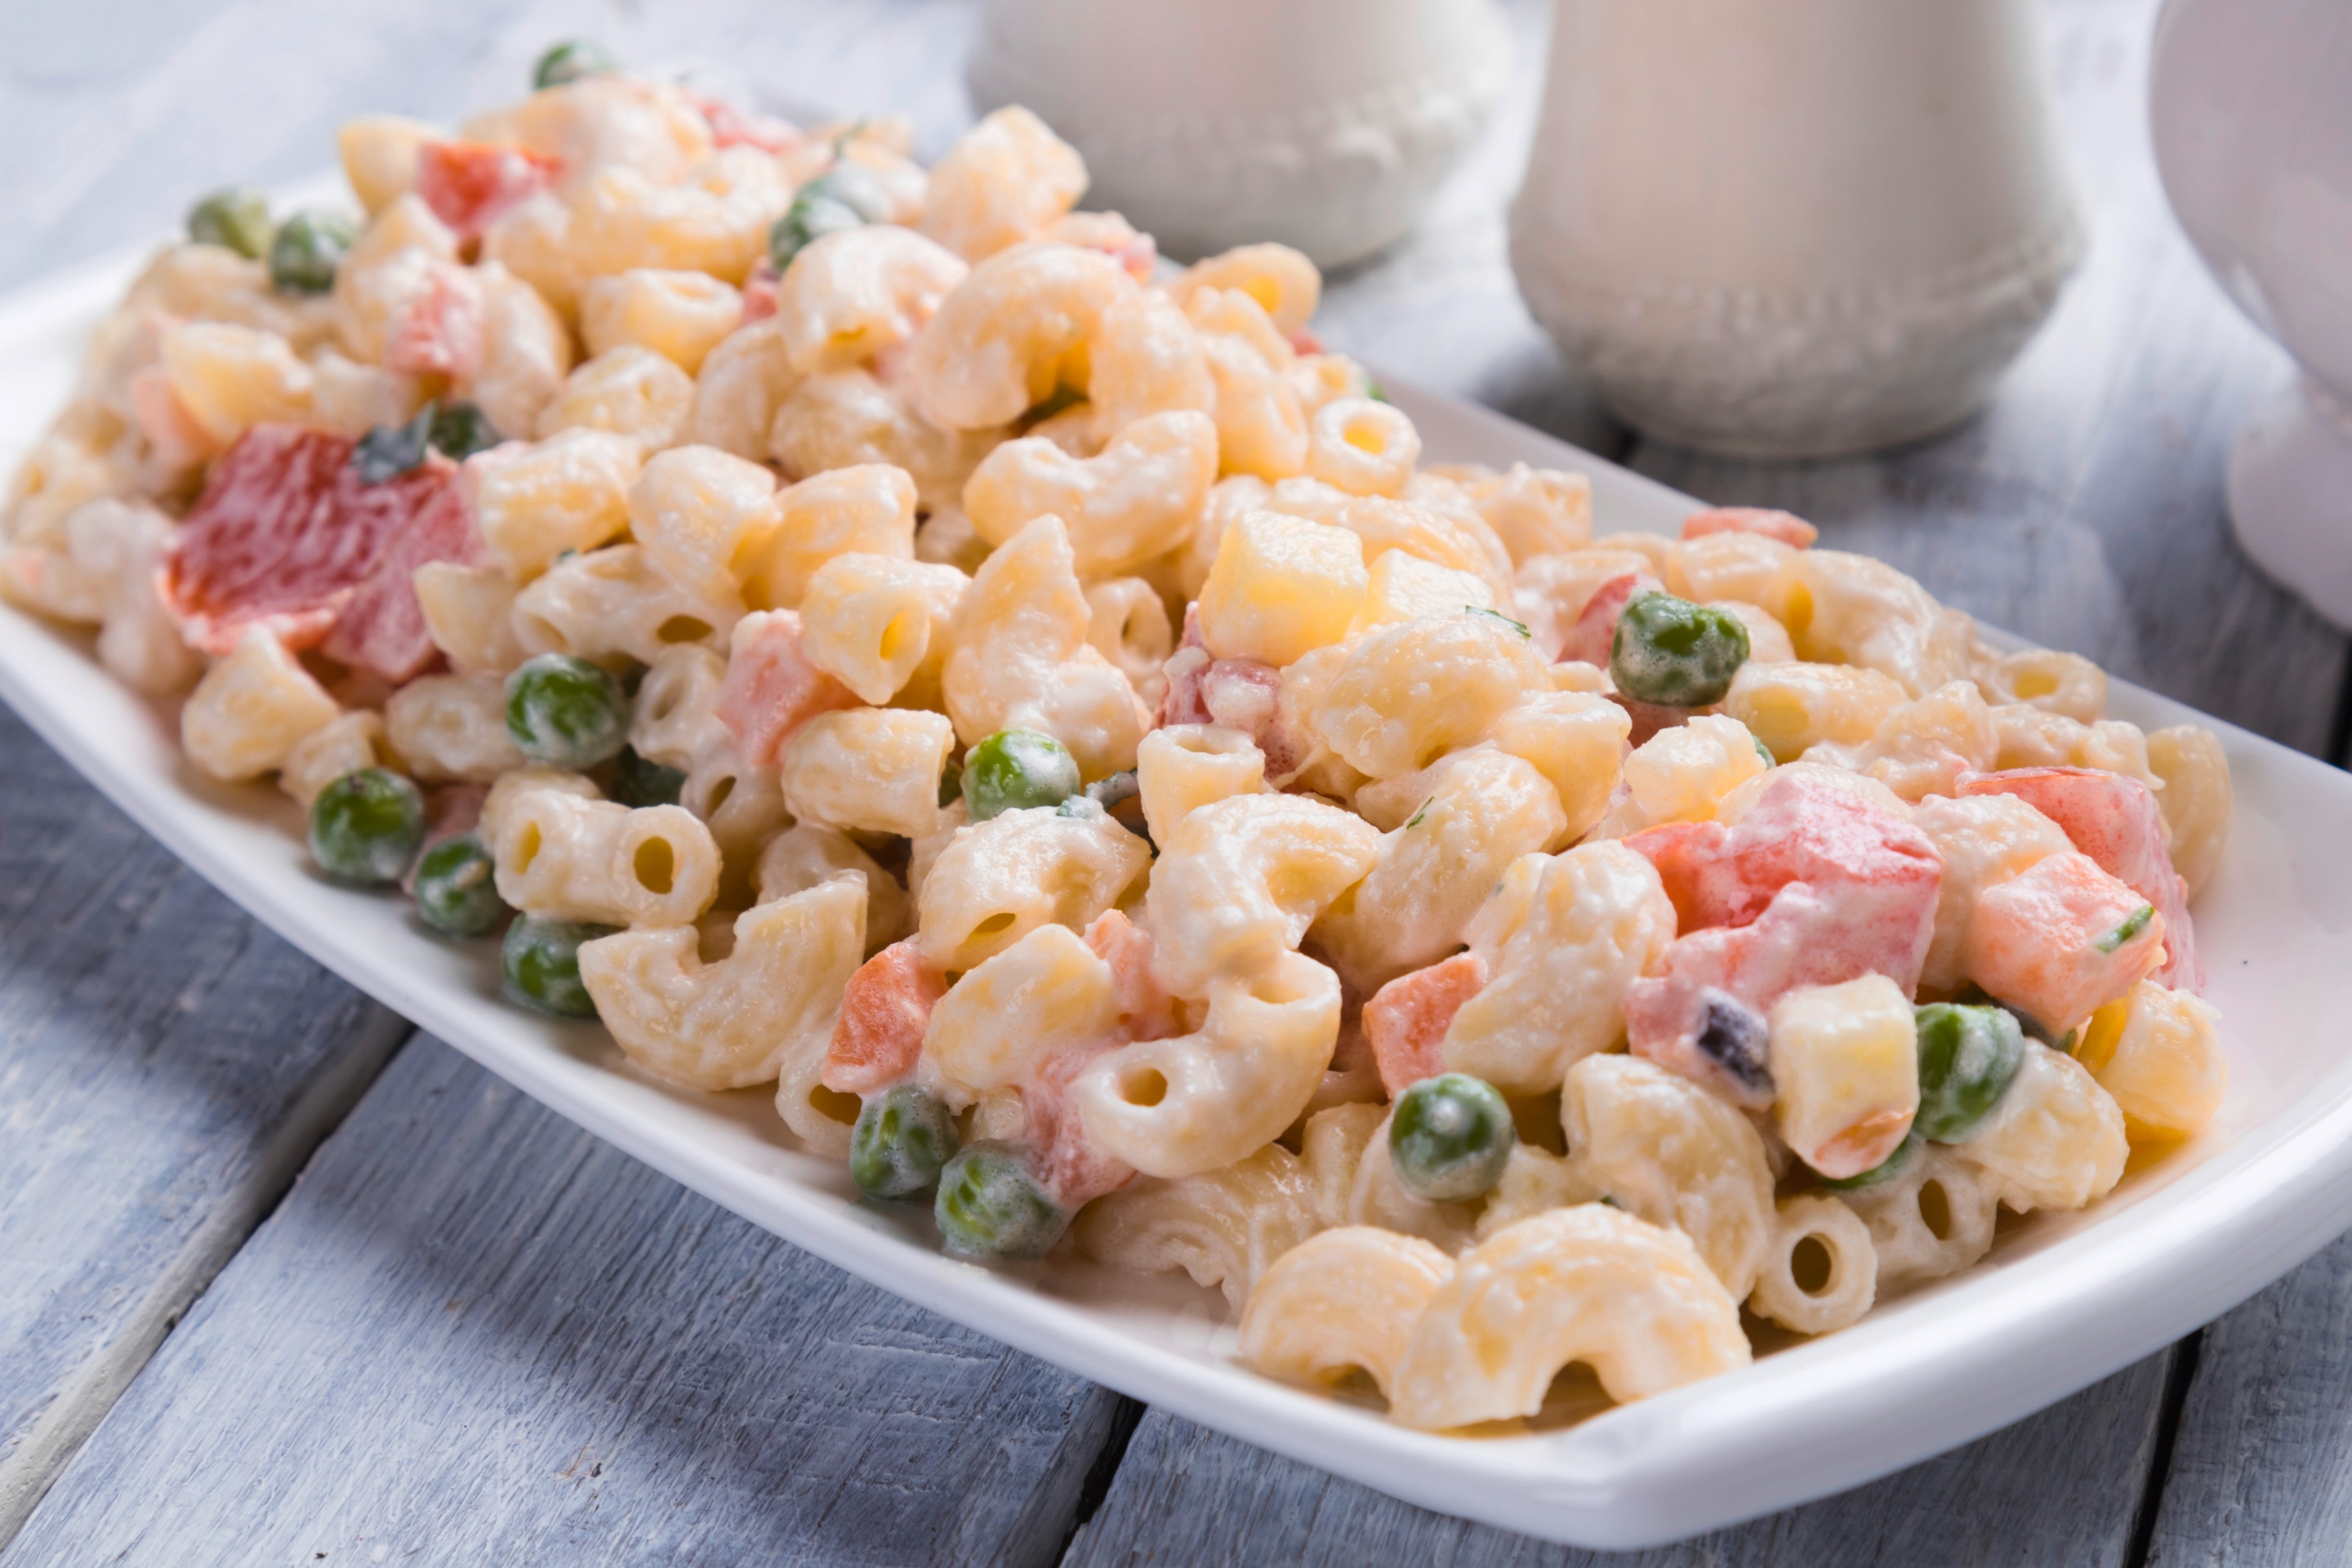 Creamy elbow macaroni salad with ham, carrots, and green peas on a white plate